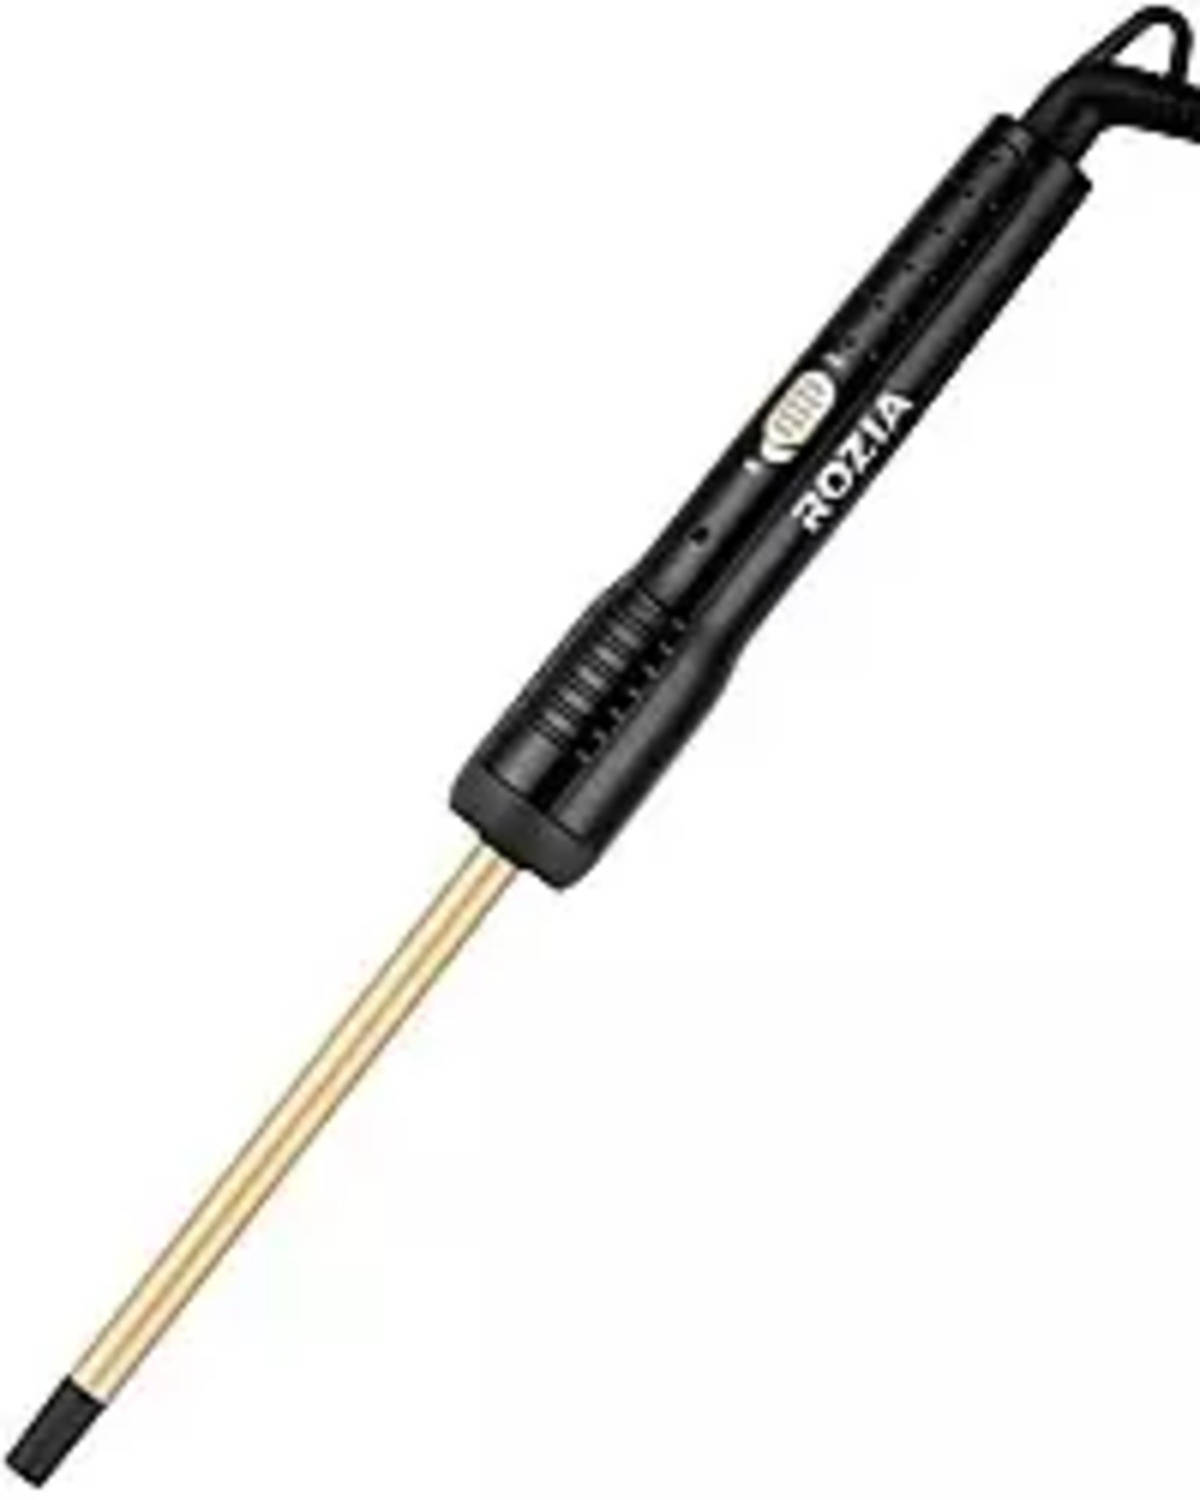 ROZIA Chopstick Hair Curler HR776 Price in India, Specifications and Review